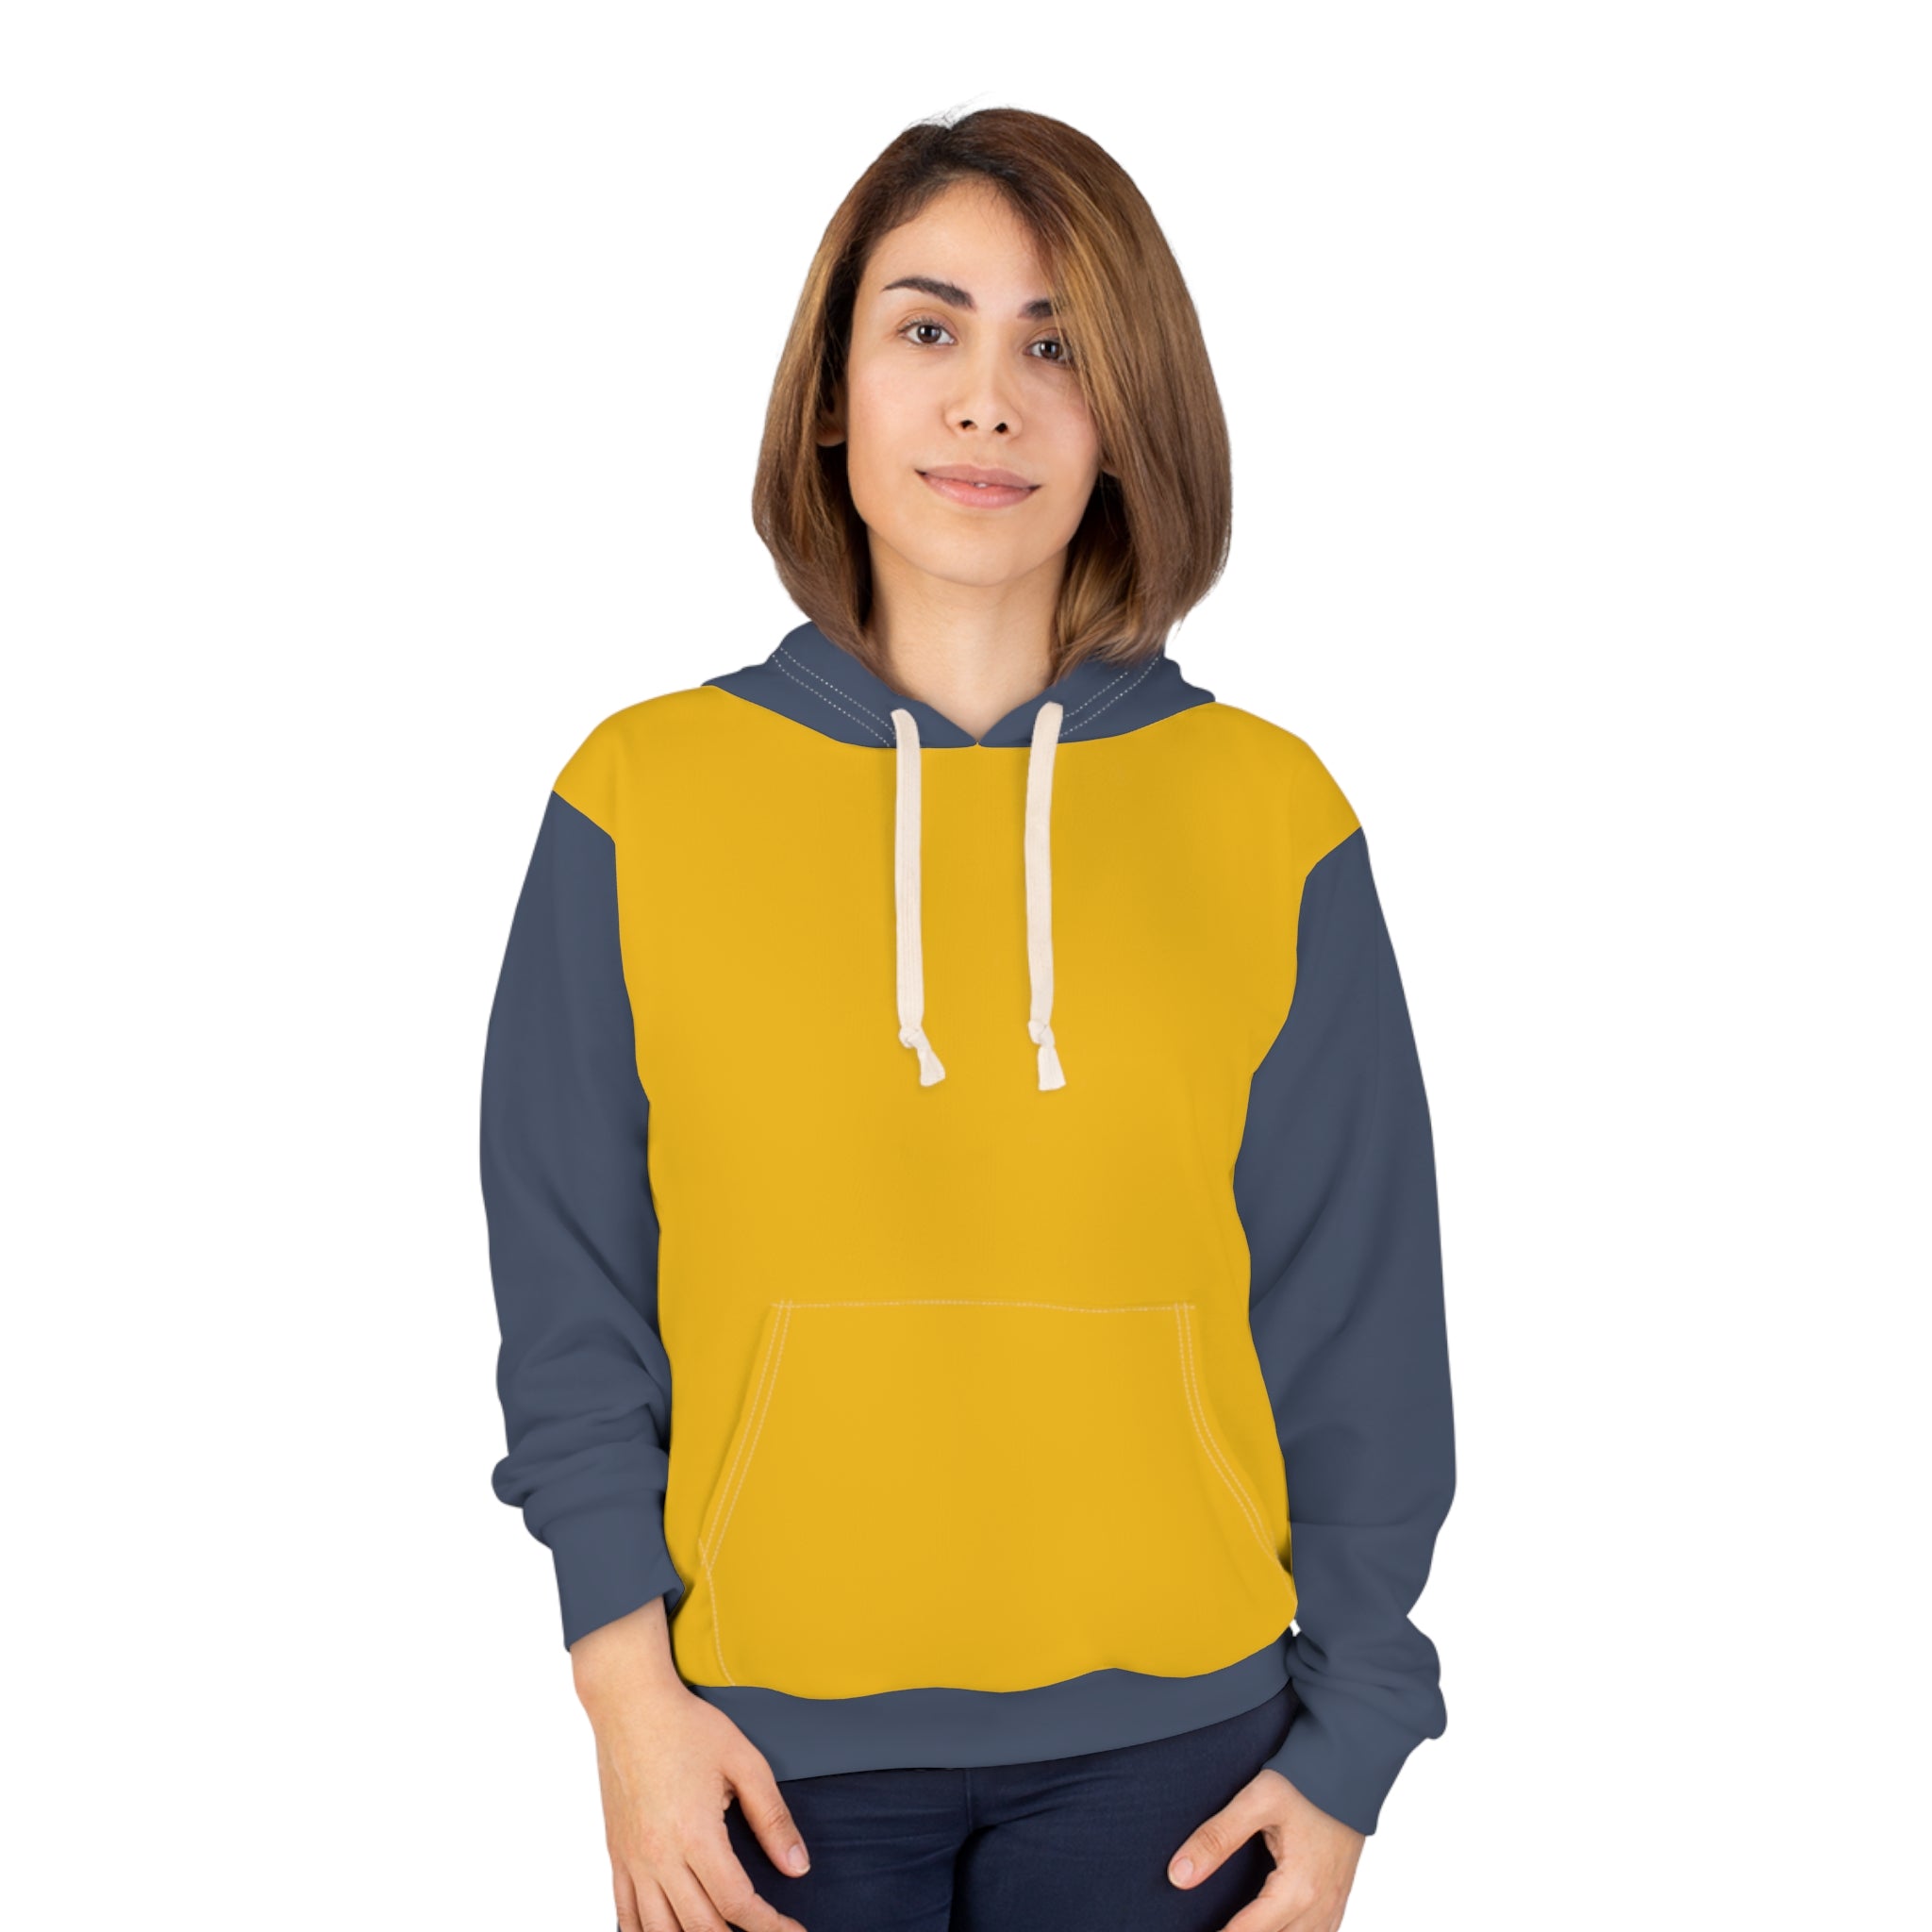 Sunny Side Up - Unisex Pullover Hoodie